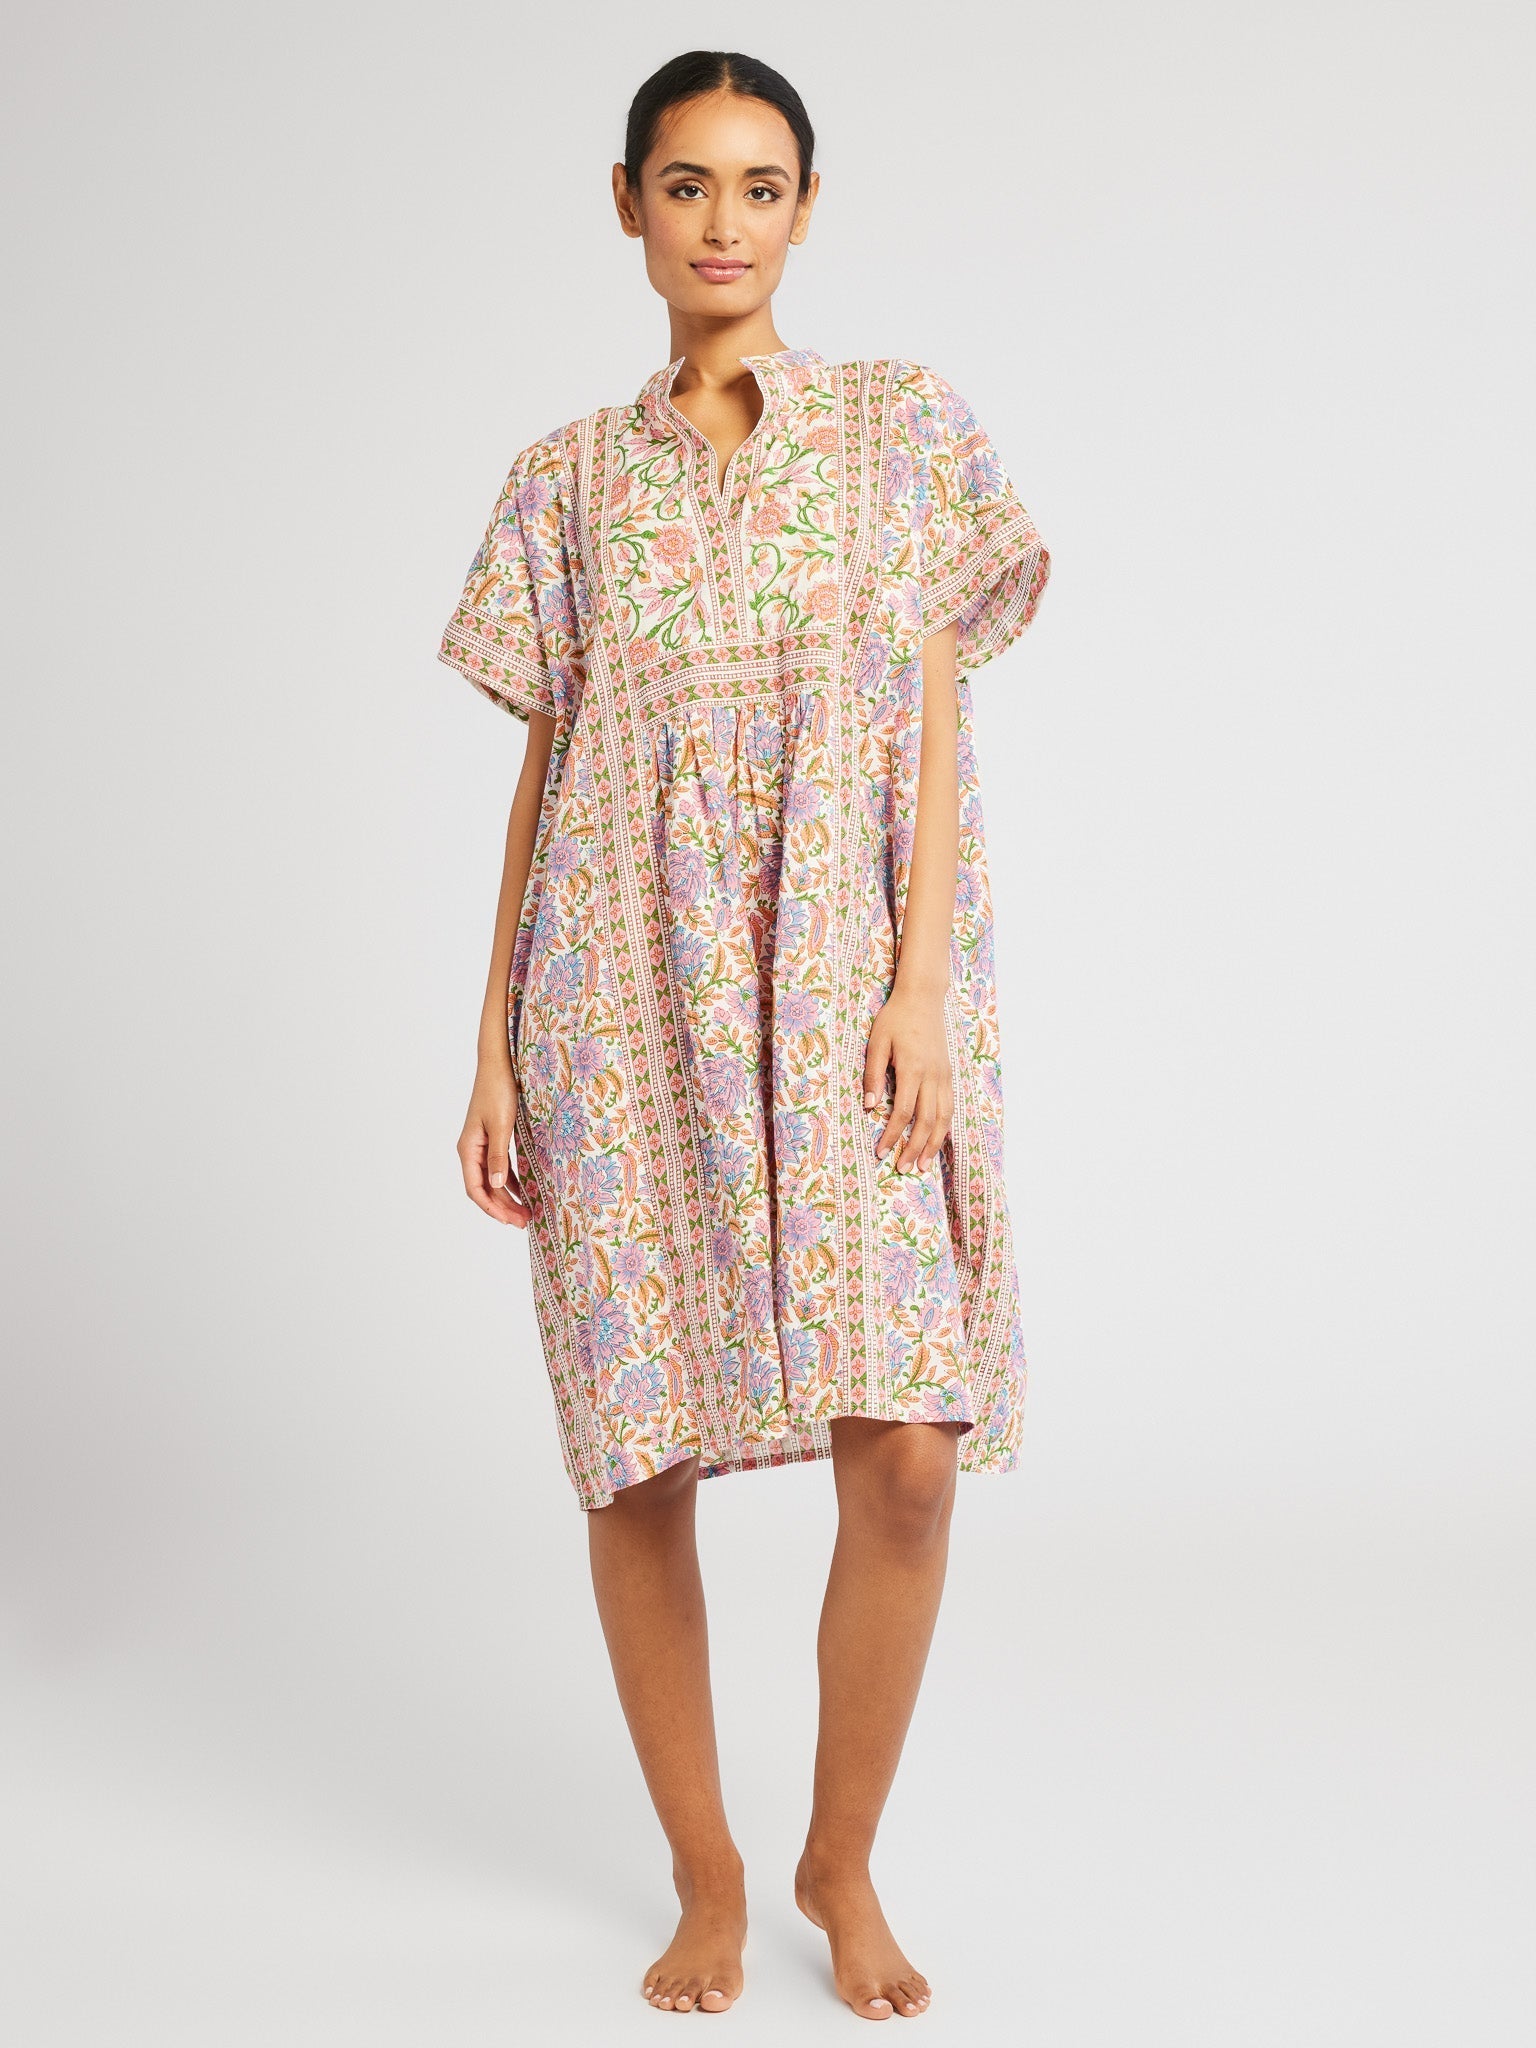 MILLE Clothing One Size Playa Caftan in Avignon Floral